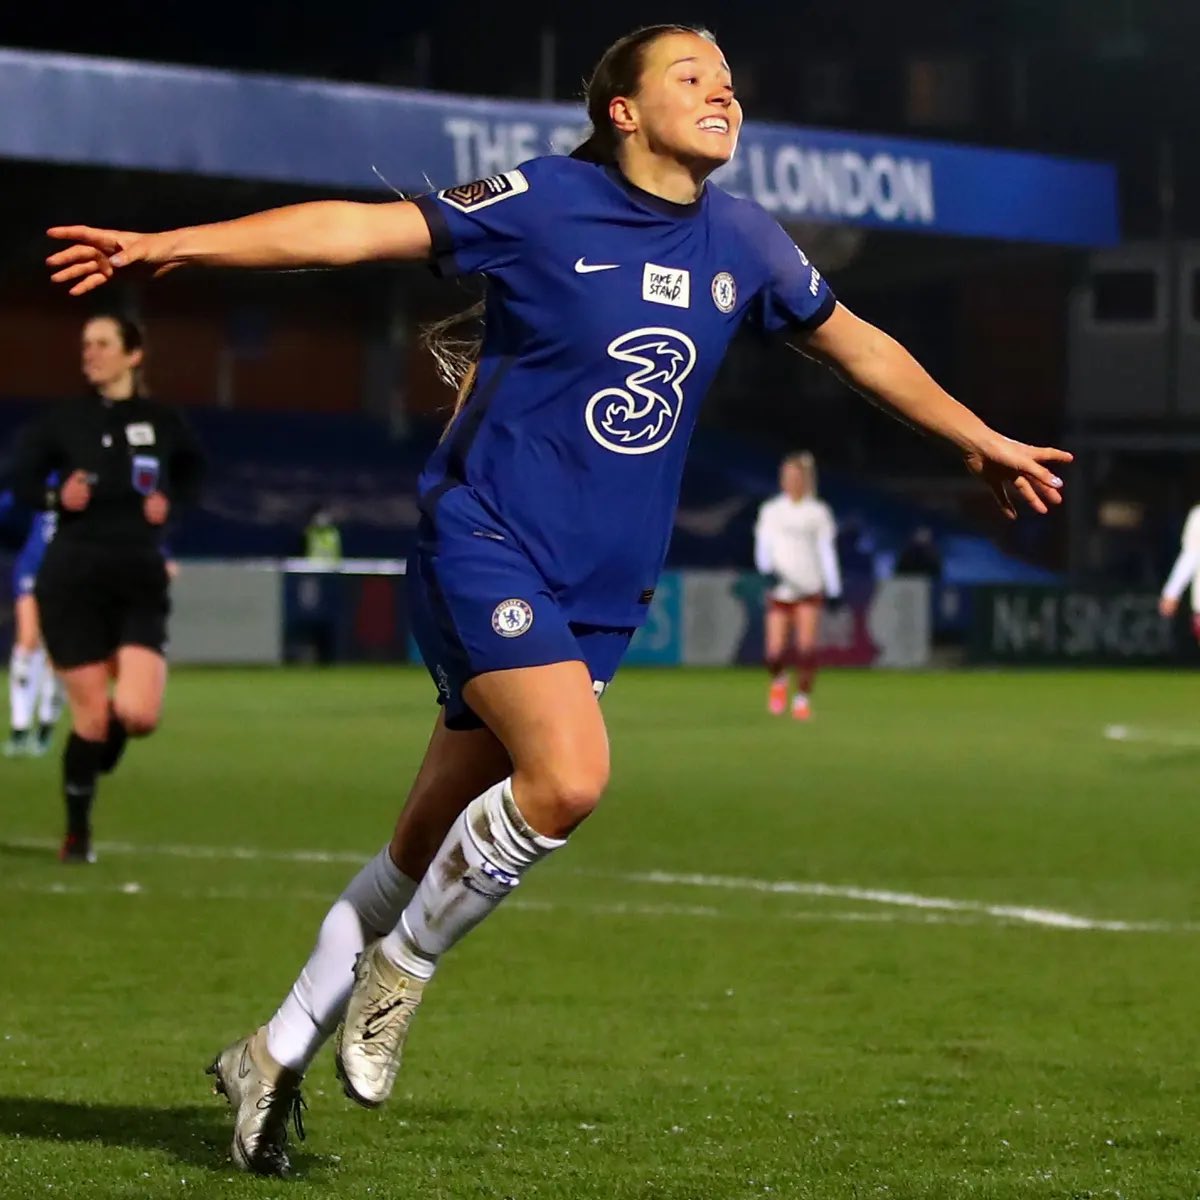 The Chelsea women's team will be undergoing a serious rebuild this summer, now Fran Kirby is also leaving, wow 🥹🥹🥹🥹 Proper Chels, Proper Legend 💙💙💙